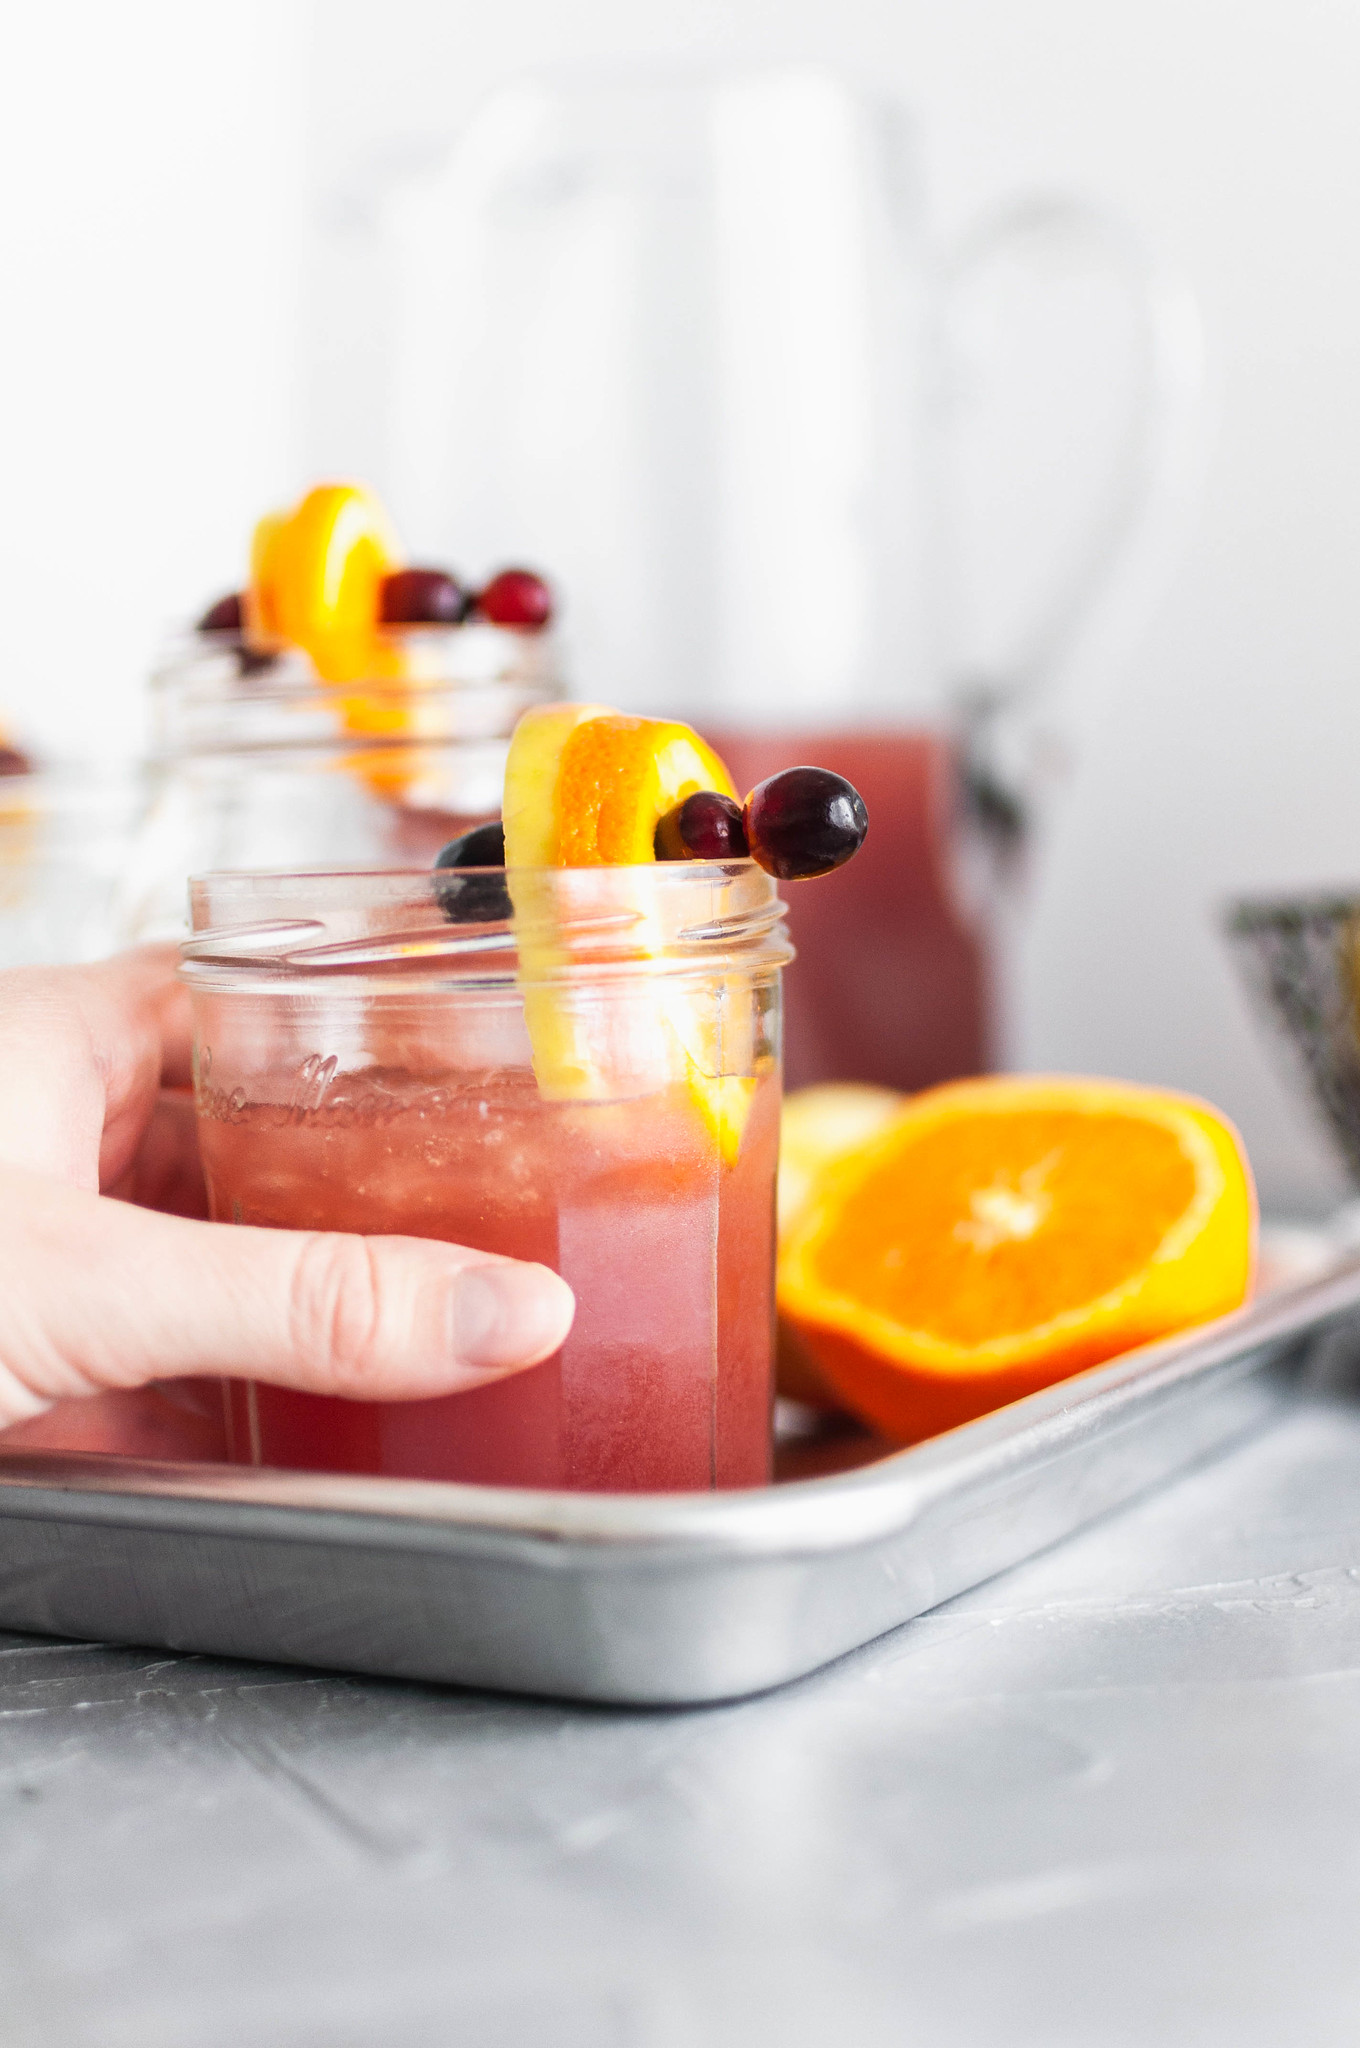 This Thanksgiving Punch is the perfect festive drink to serve on Thanksgiving. Cranberry juice, orange juice, apple cider and ginger beer create a deliciously addictive punch. Spiced rum optional.